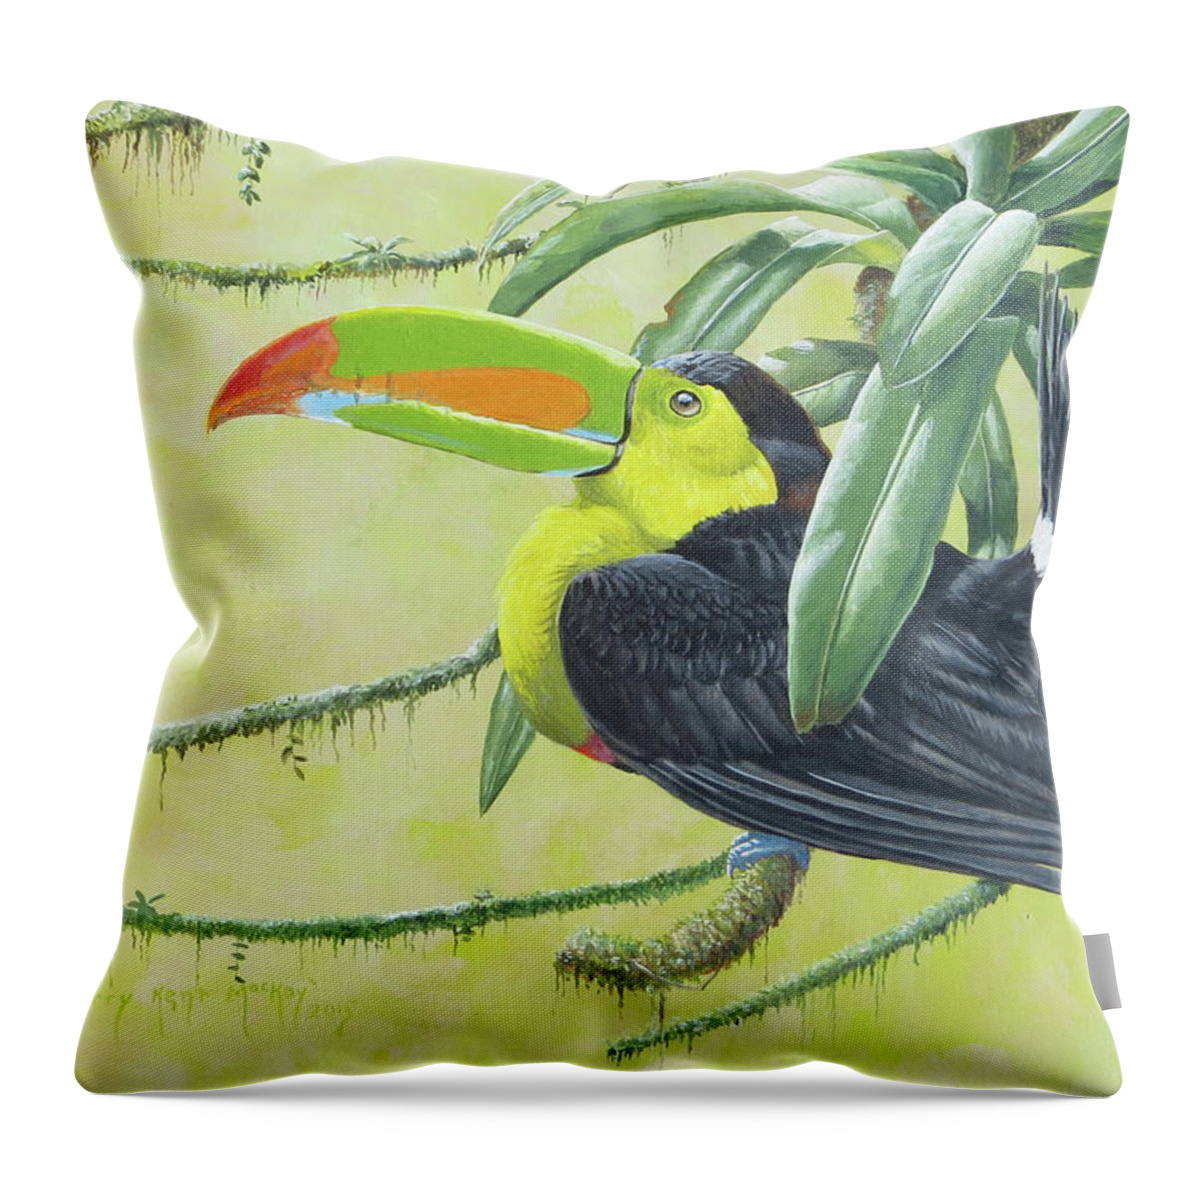 Keel-billed Toucan Throw Pillow featuring the painting Keel-billed Toucan by Barry Kent MacKay